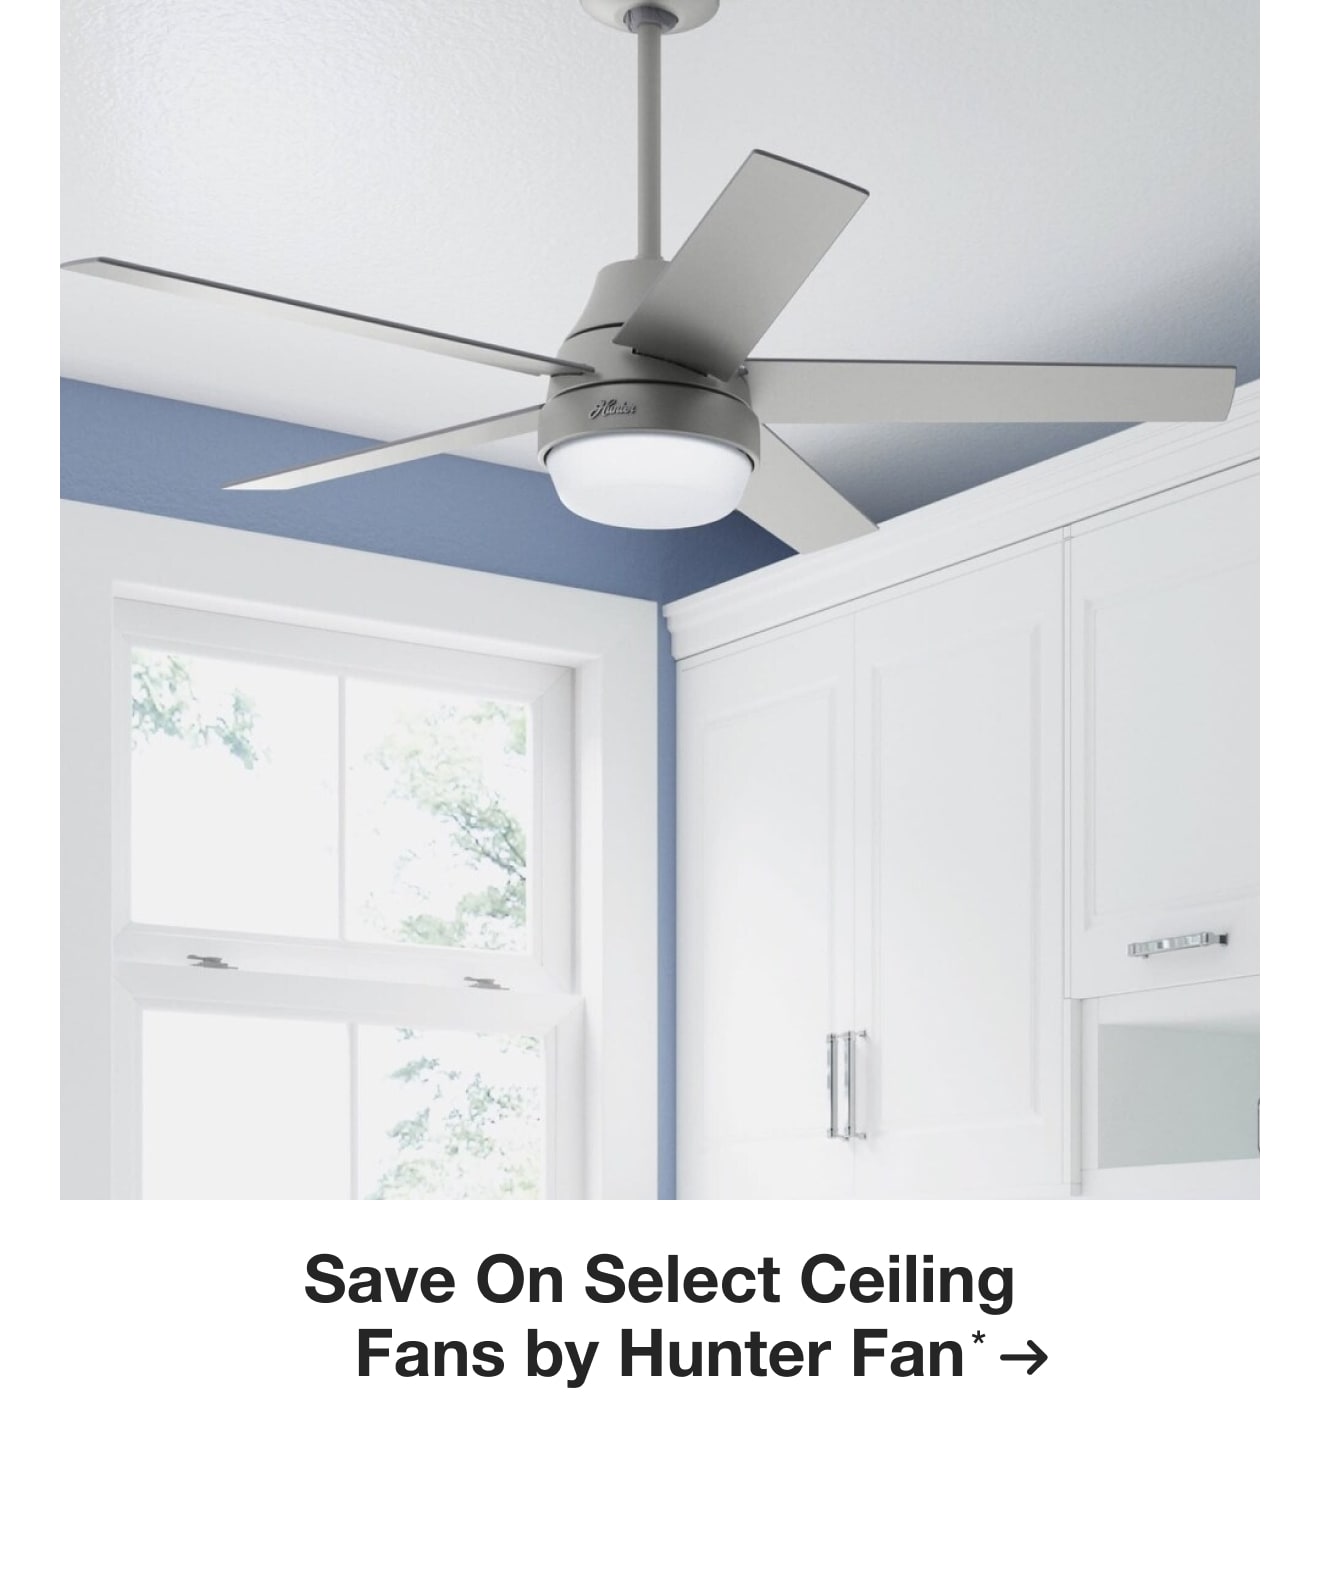 Save On Select Ceiling Fans by Hunter Fan